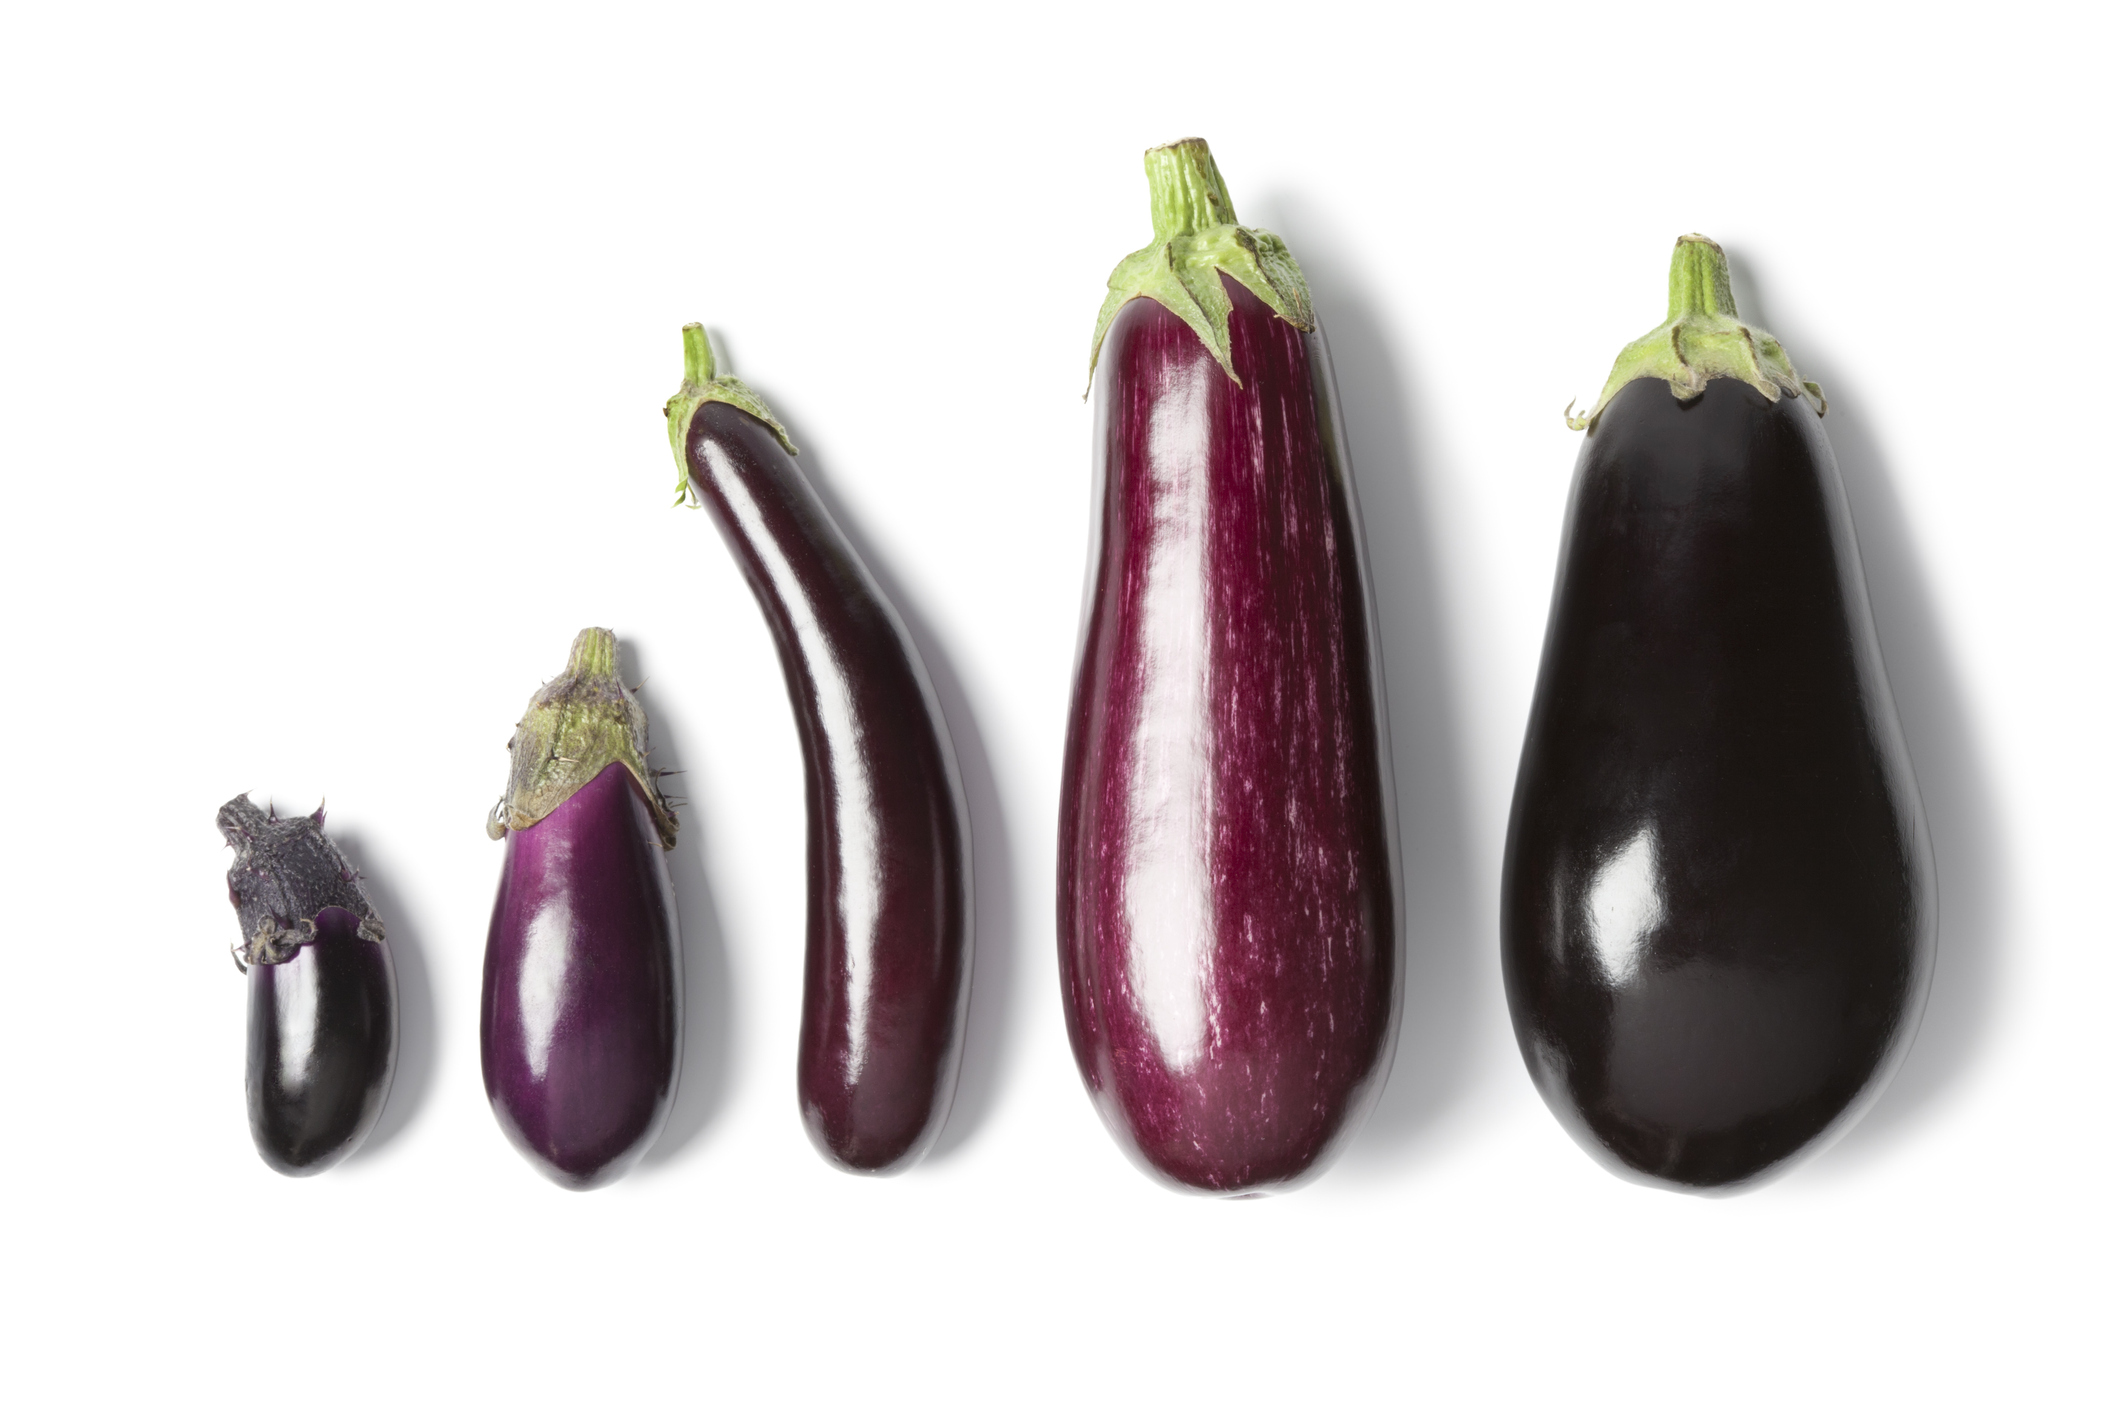 Eggplant flour may be a nutraceutical for functional foods: Study